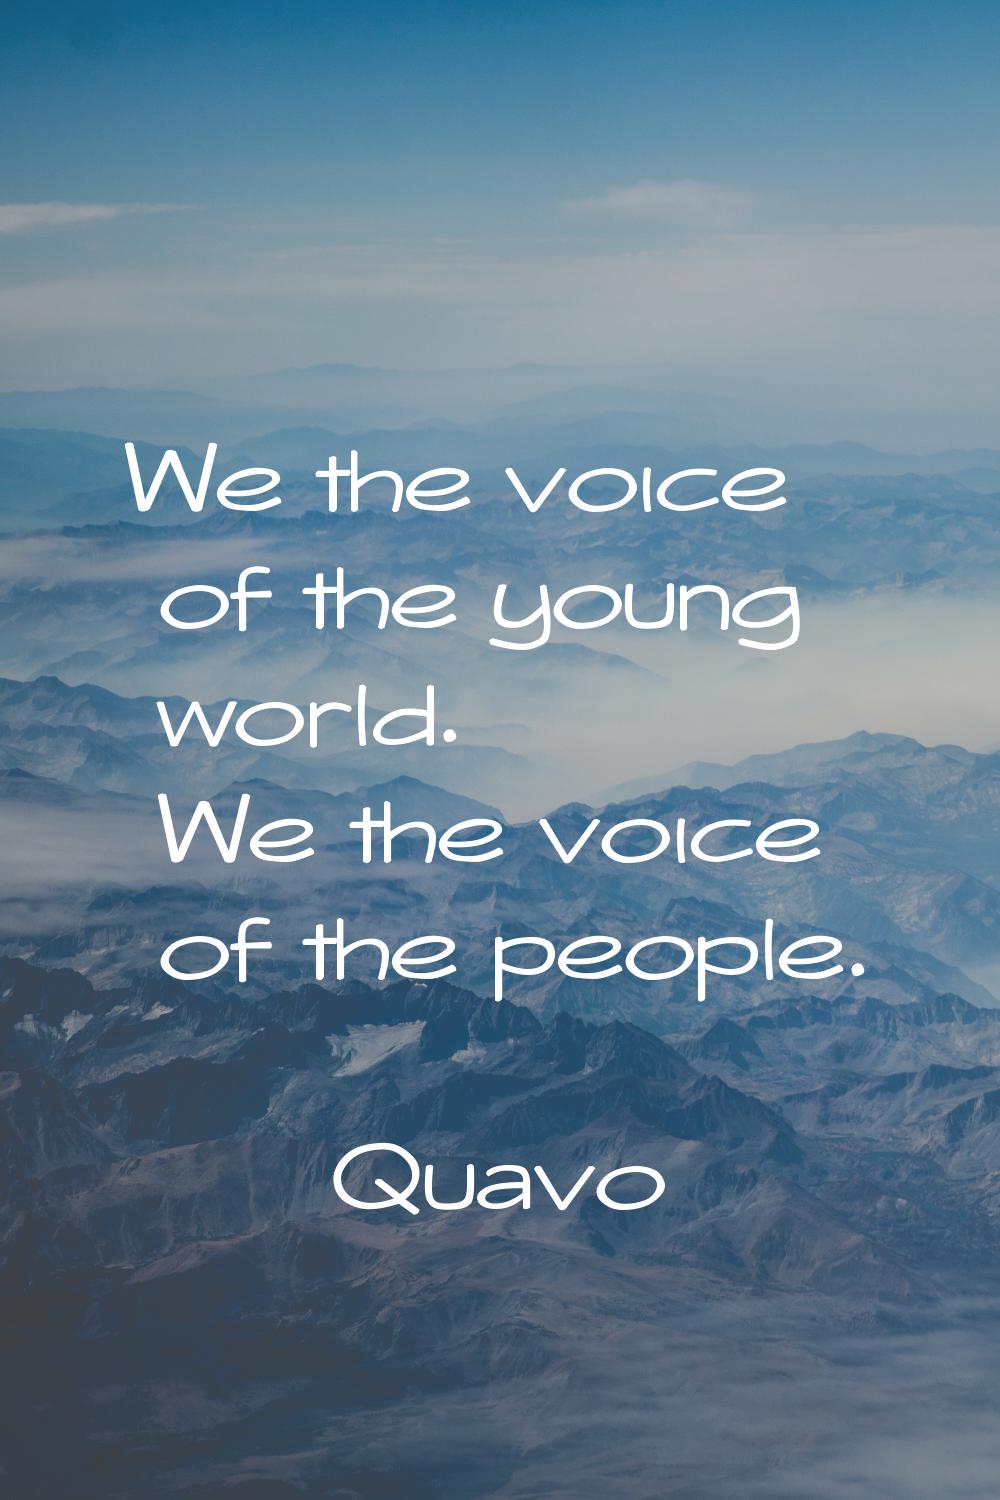 We the voice of the young world. We the voice of the people.